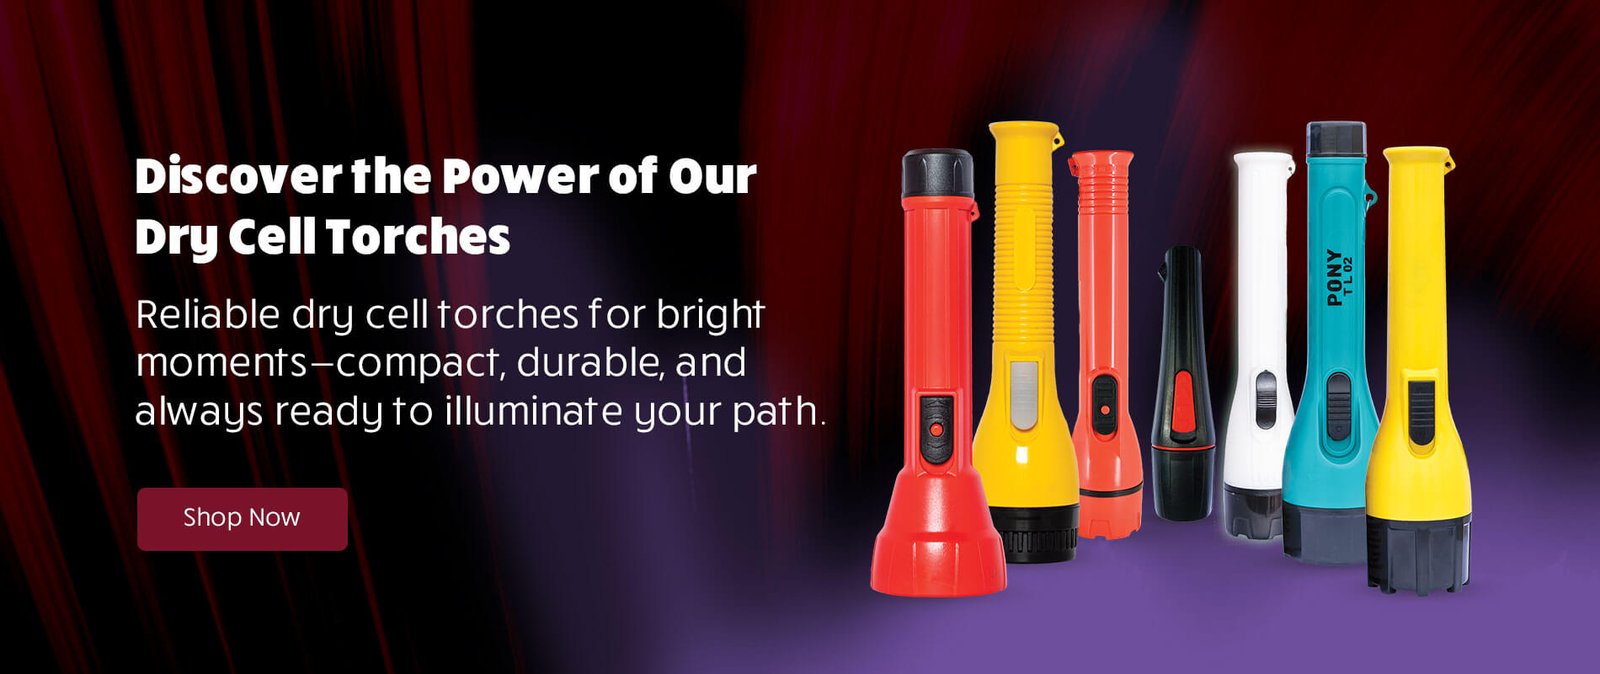 Dry Cell Torches